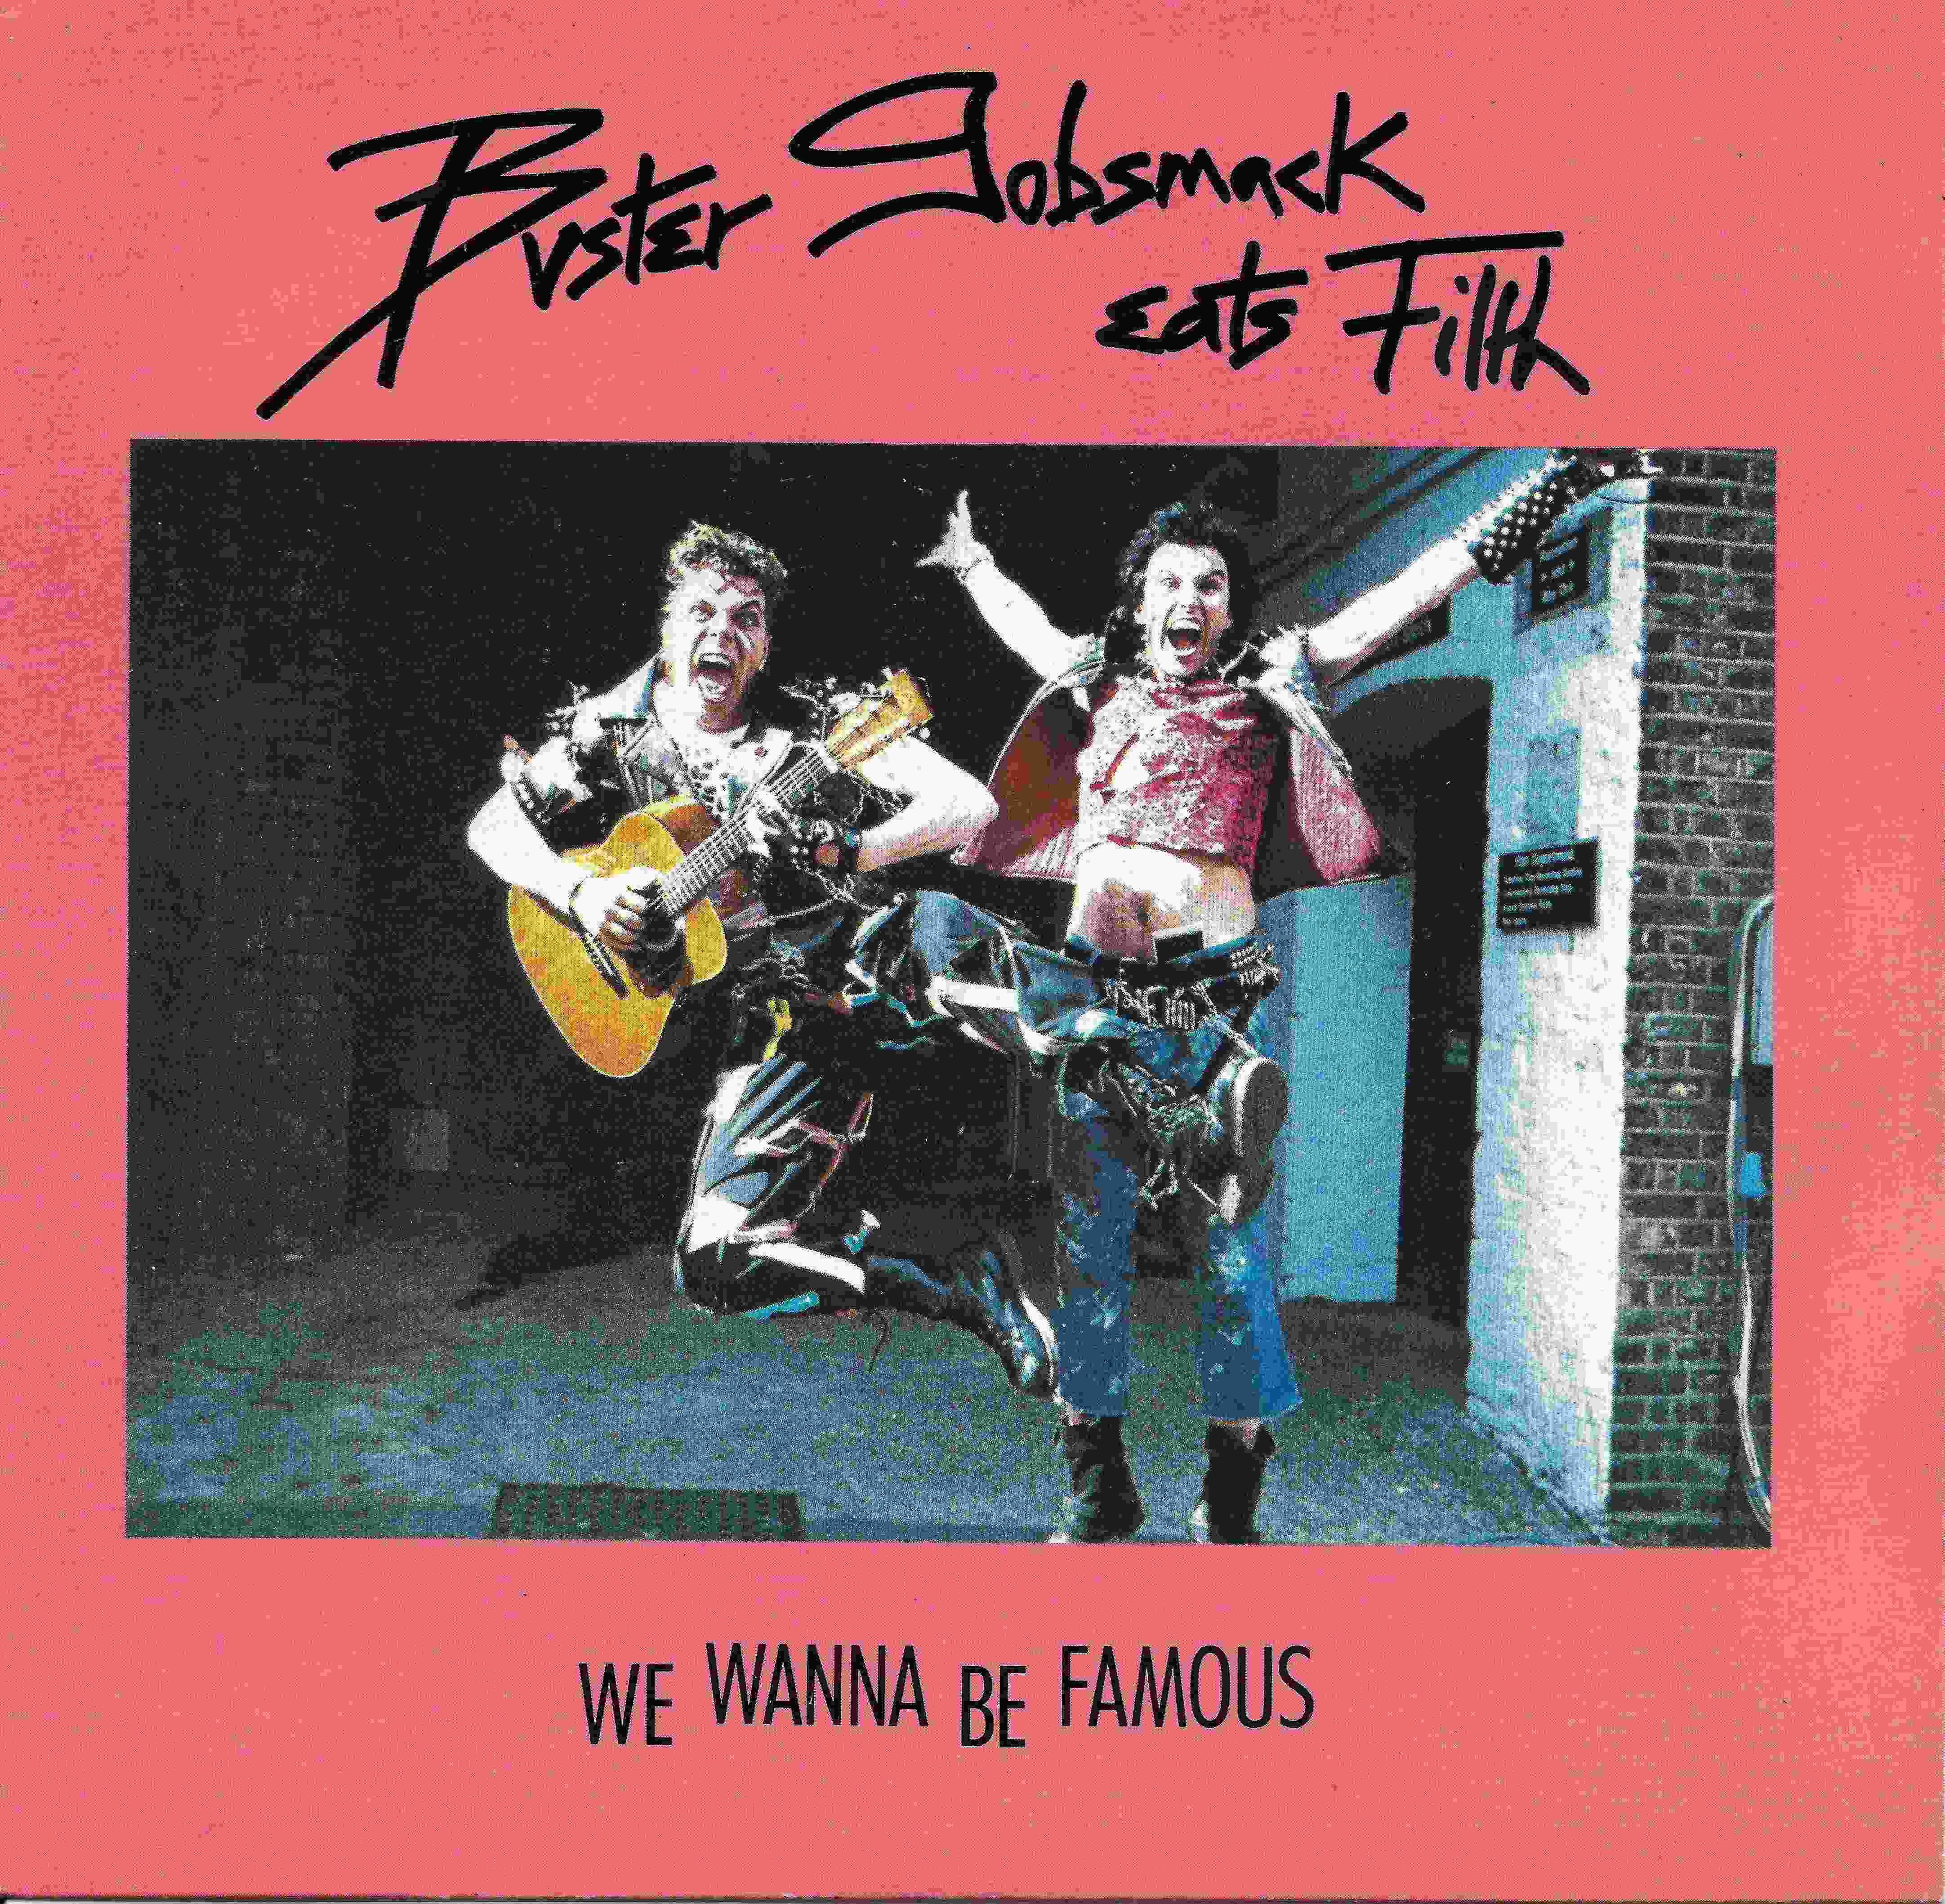 Picture of We wanna be famous (That's life) by artist Buster Gobsmack Eats Filth / El Shaftit & the Timeshares from the BBC singles - Records and Tapes library